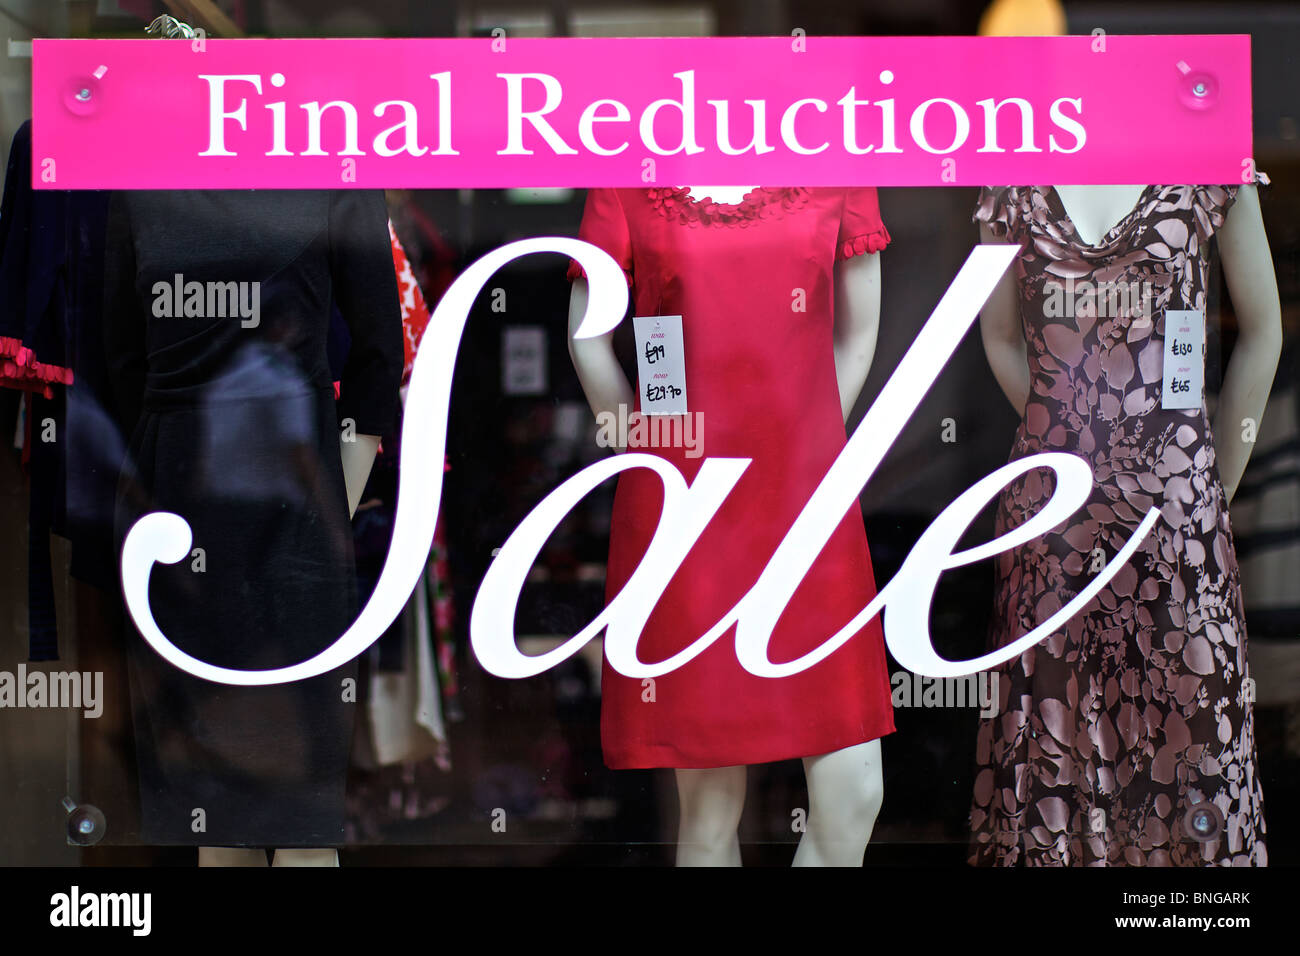 Final Reduction sale promotional material in High Street fashion shop Stock Photo